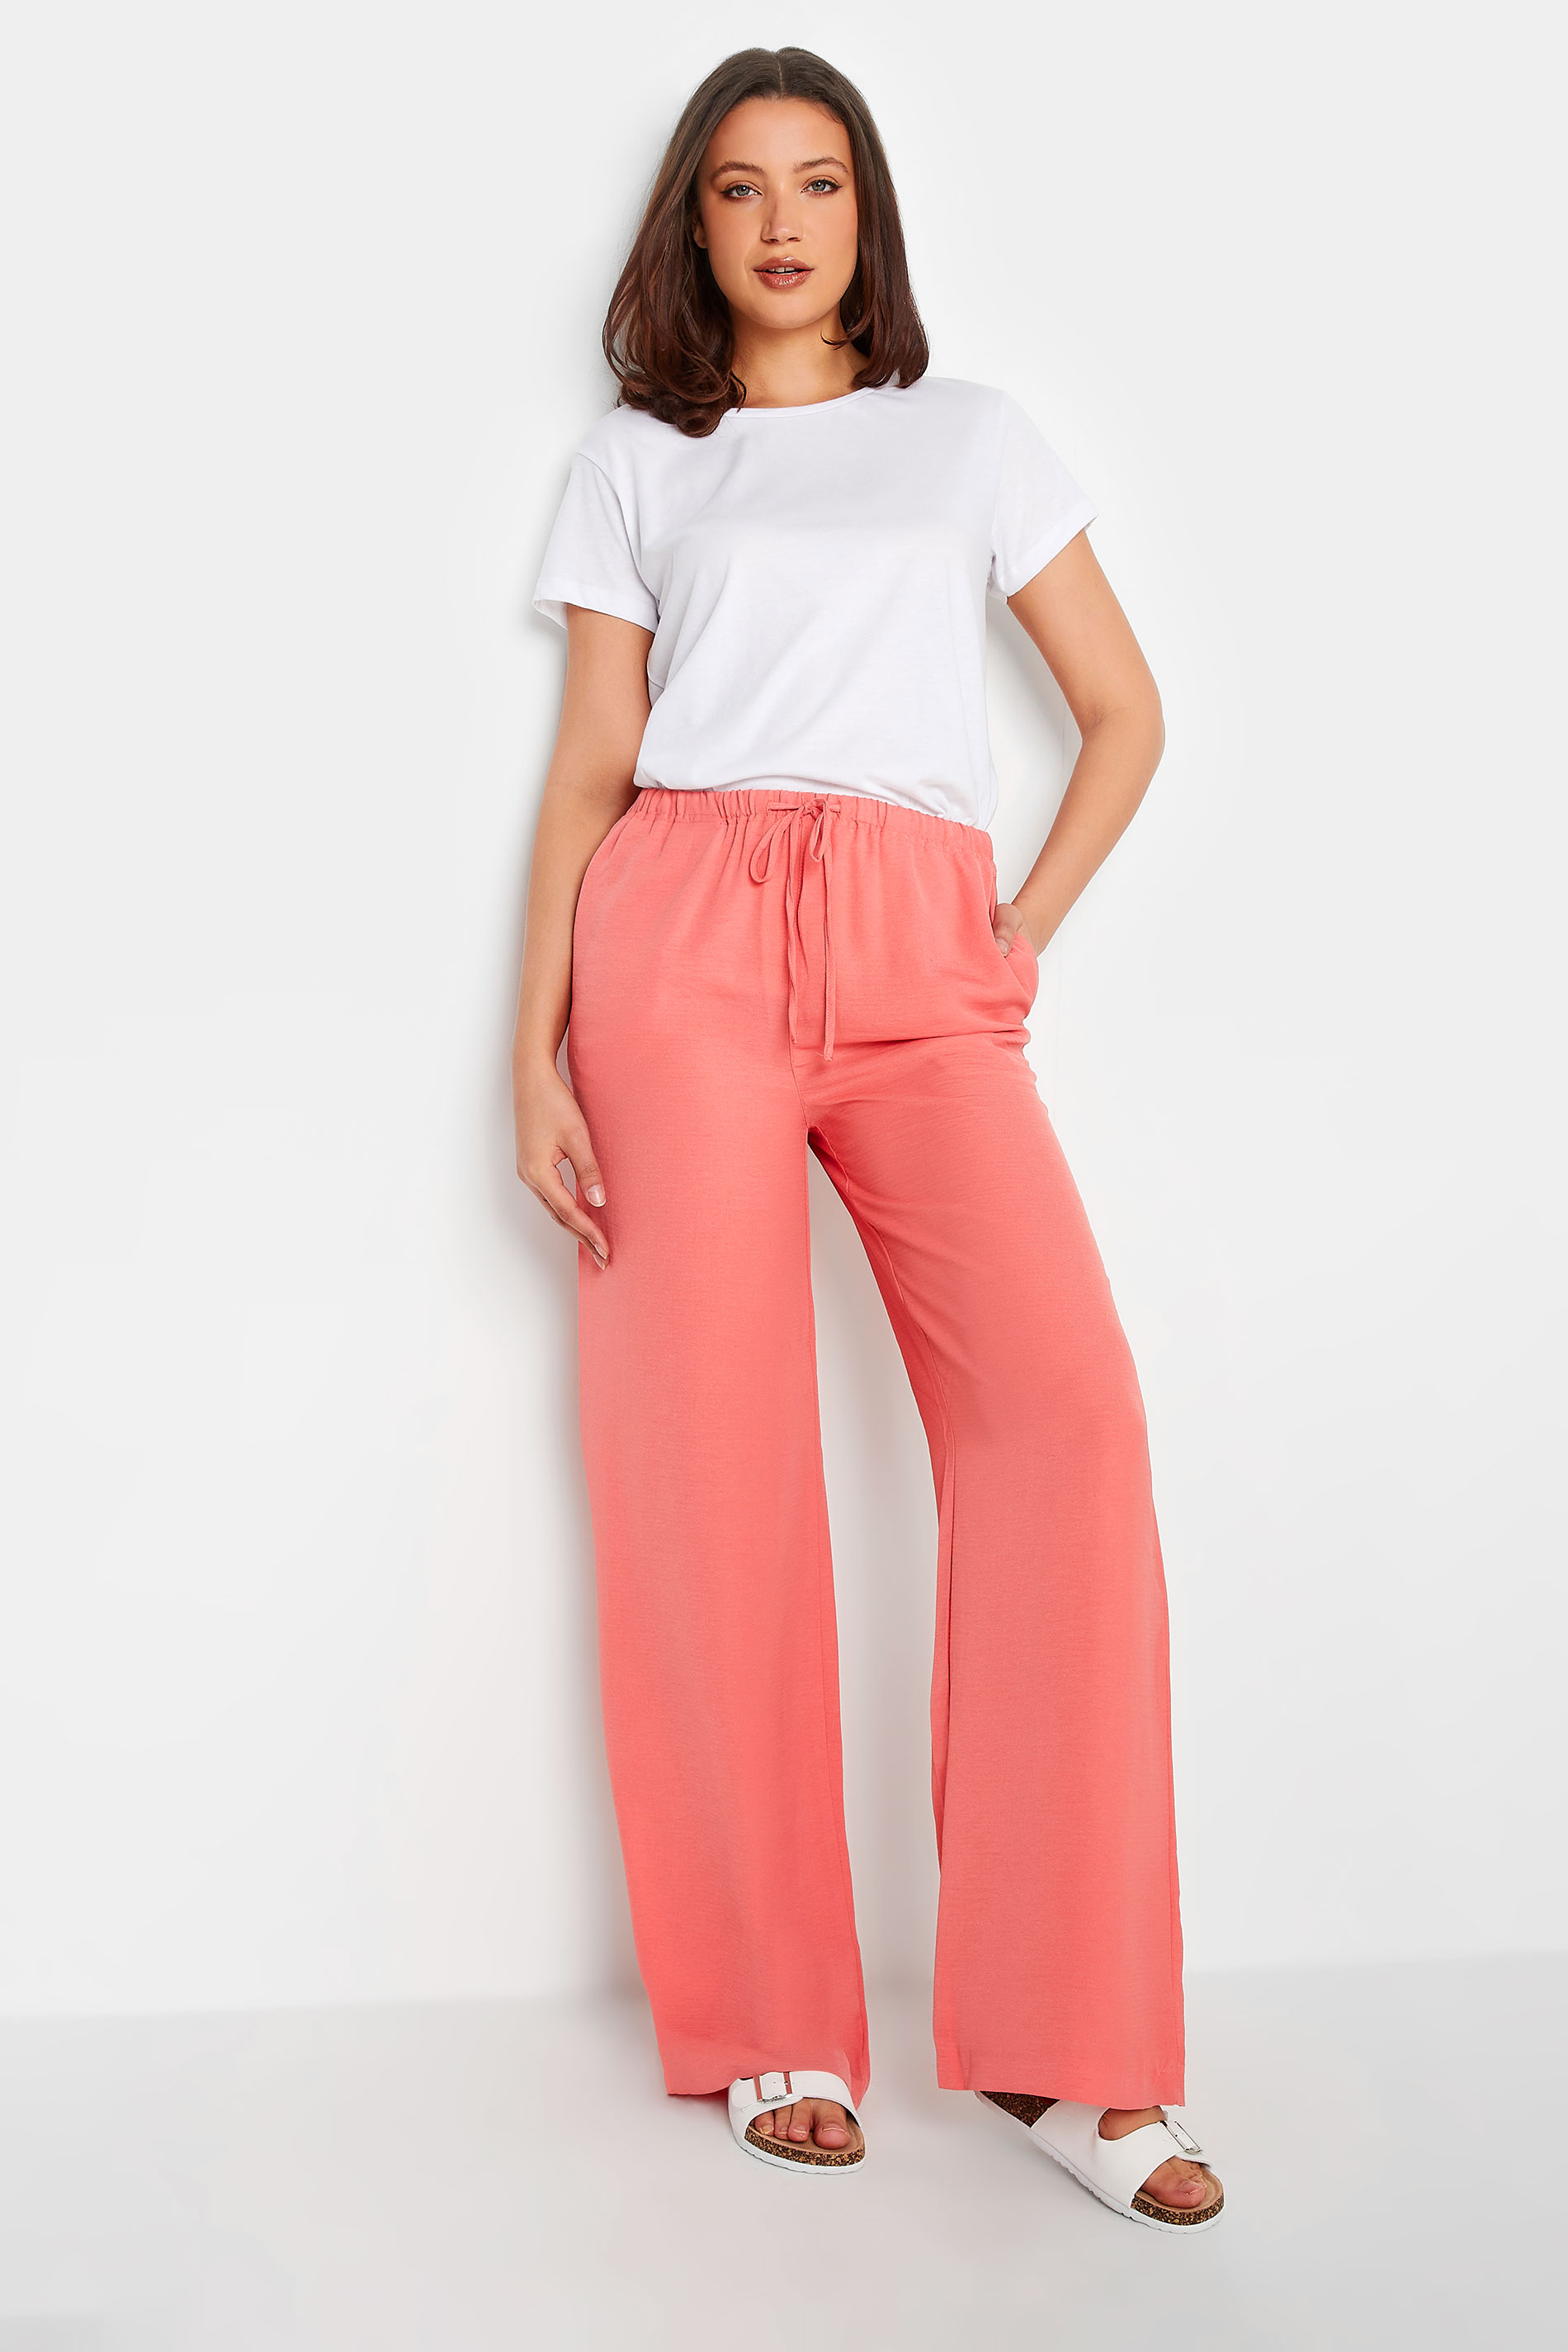 Neutral Lightweight Utility Trousers  Women  George at ASDA